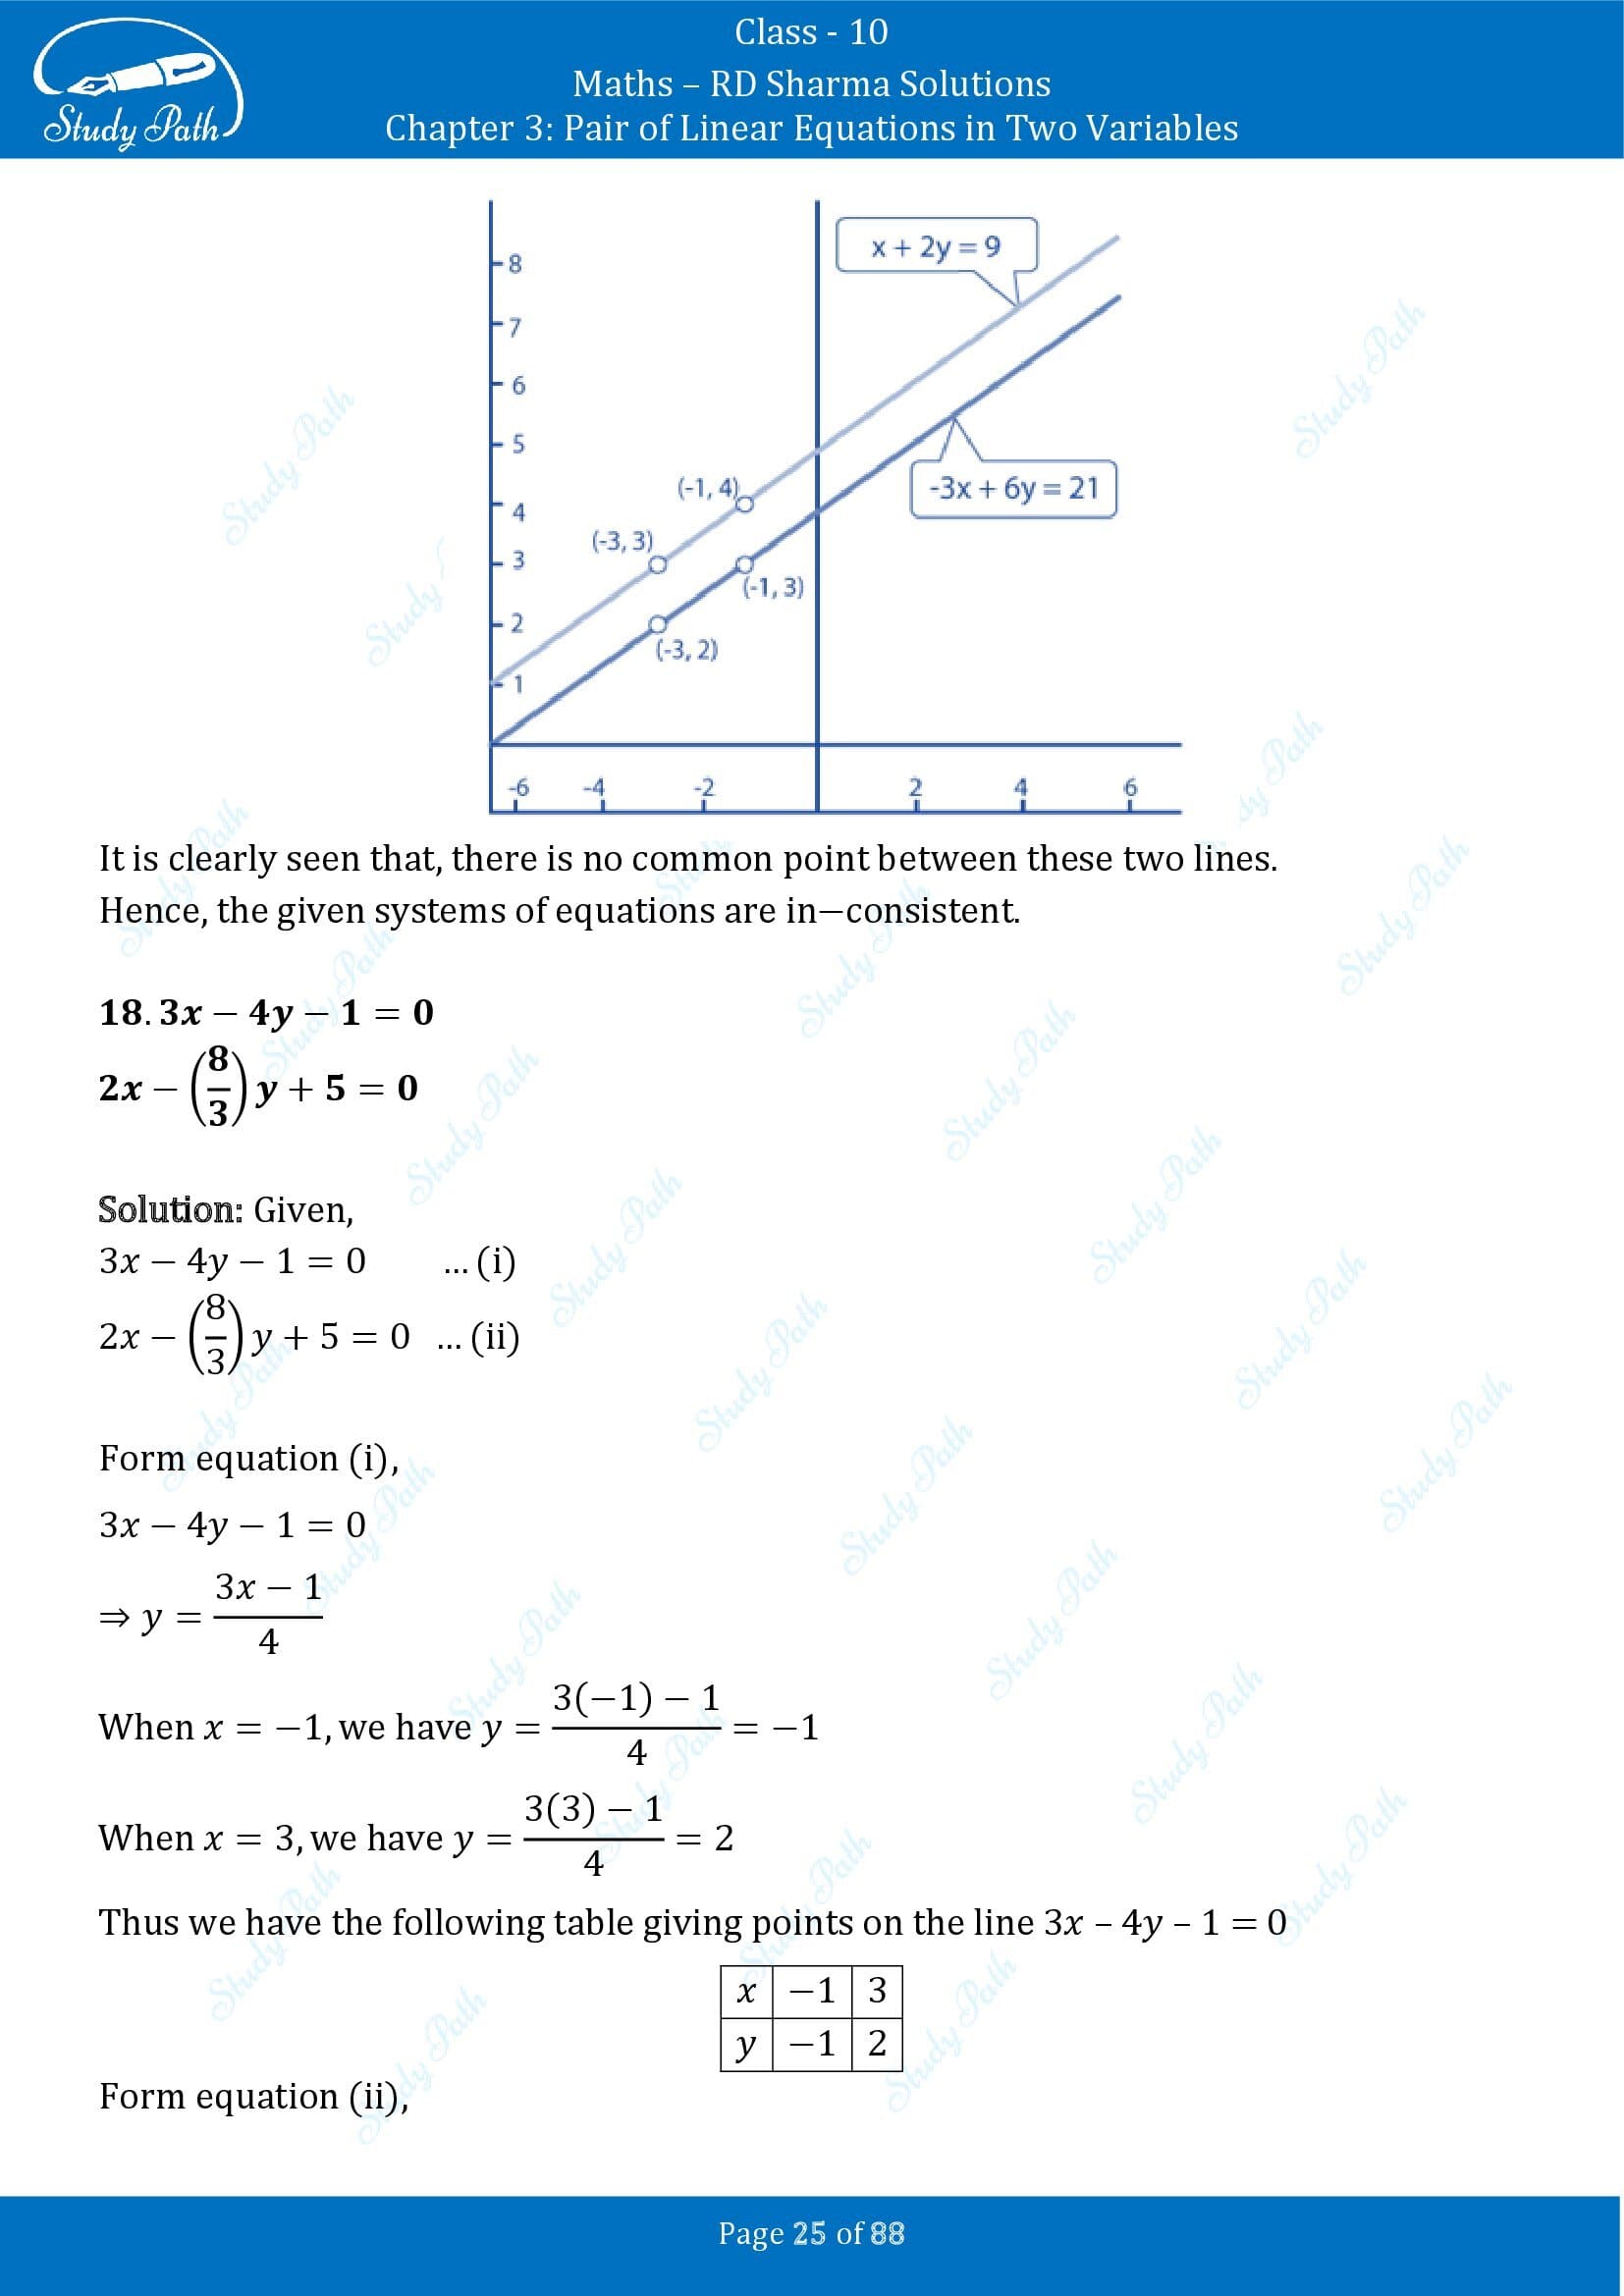 RD Sharma Solutions Class 10 Chapter 3 Pair of Linear Equations in Two Variables Exercise 3.2 00025